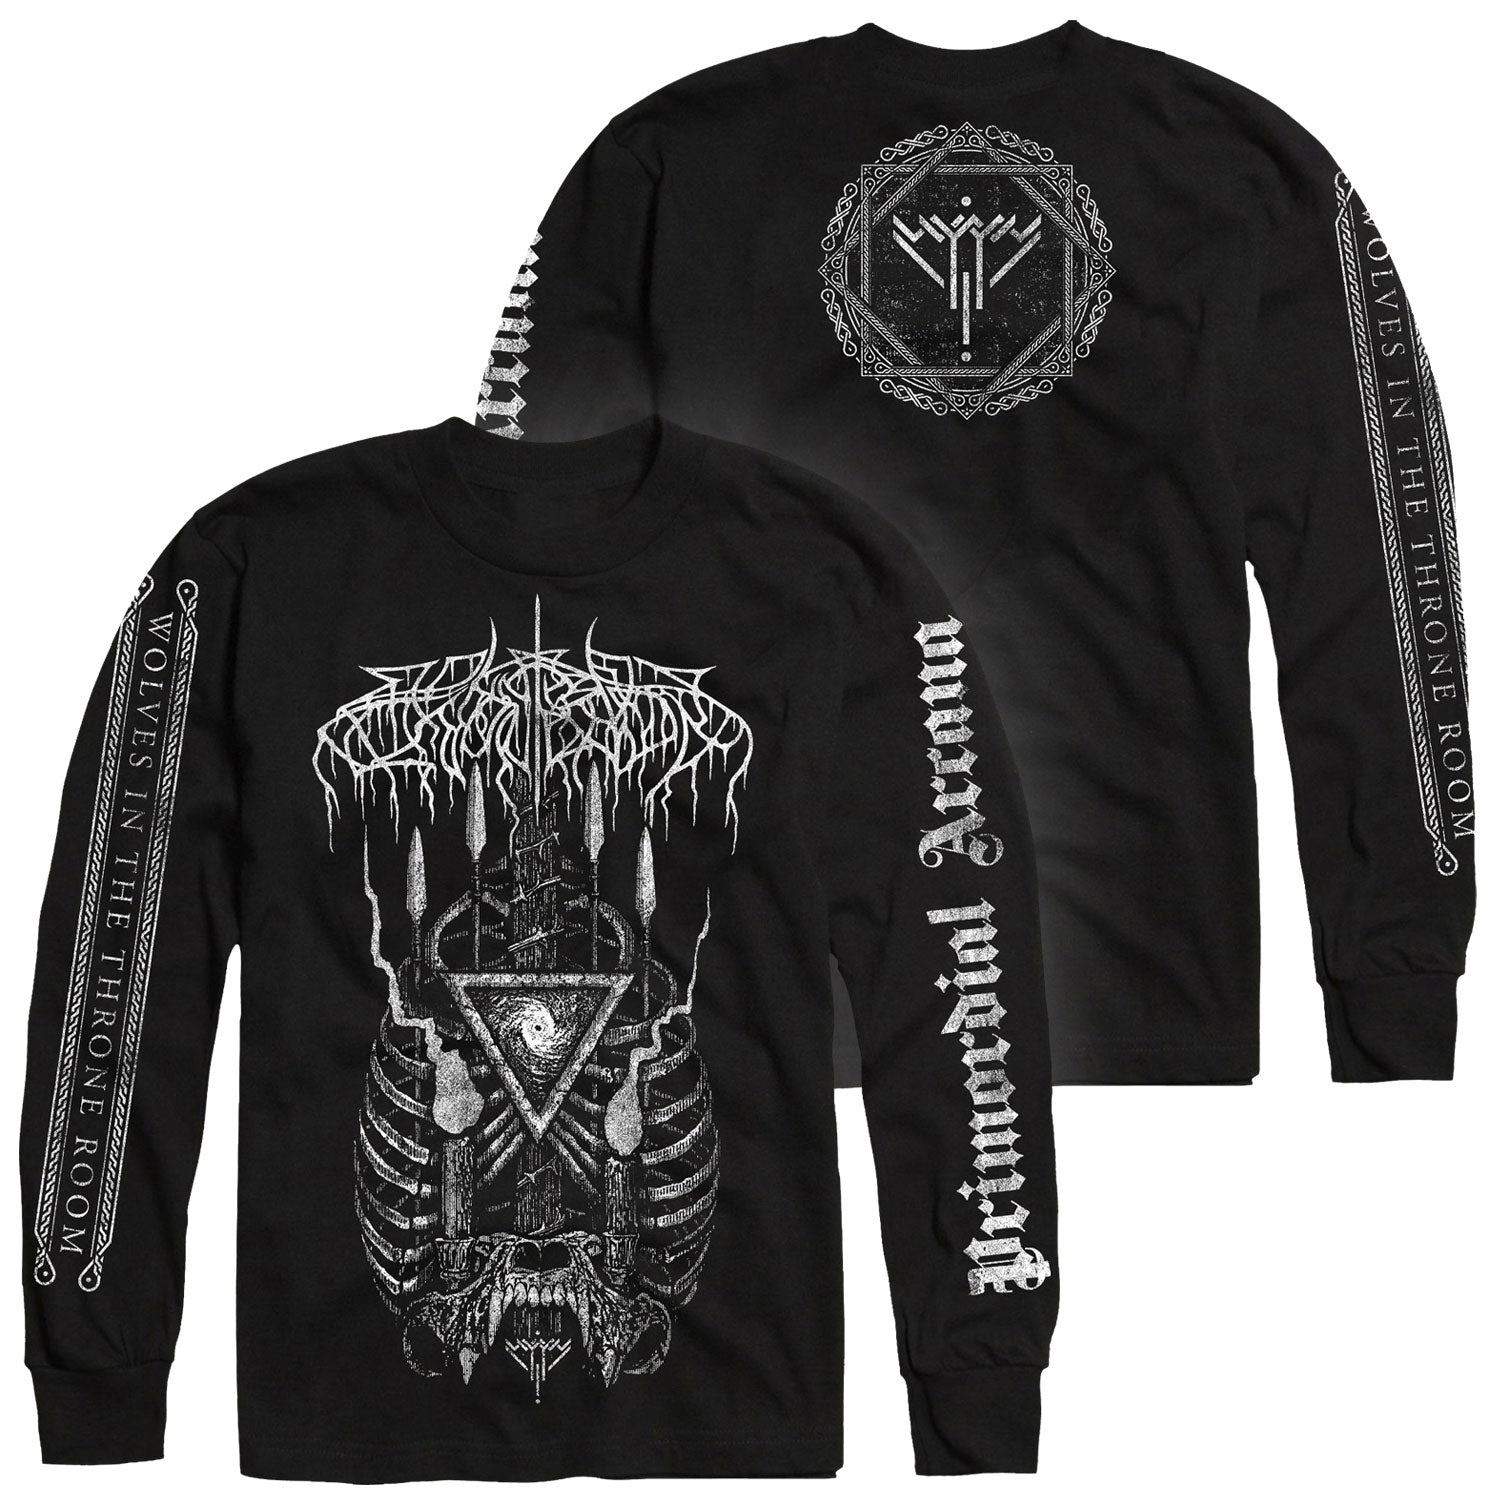 Wolves In The Throne Room "Primal Chasm" Longsleeve